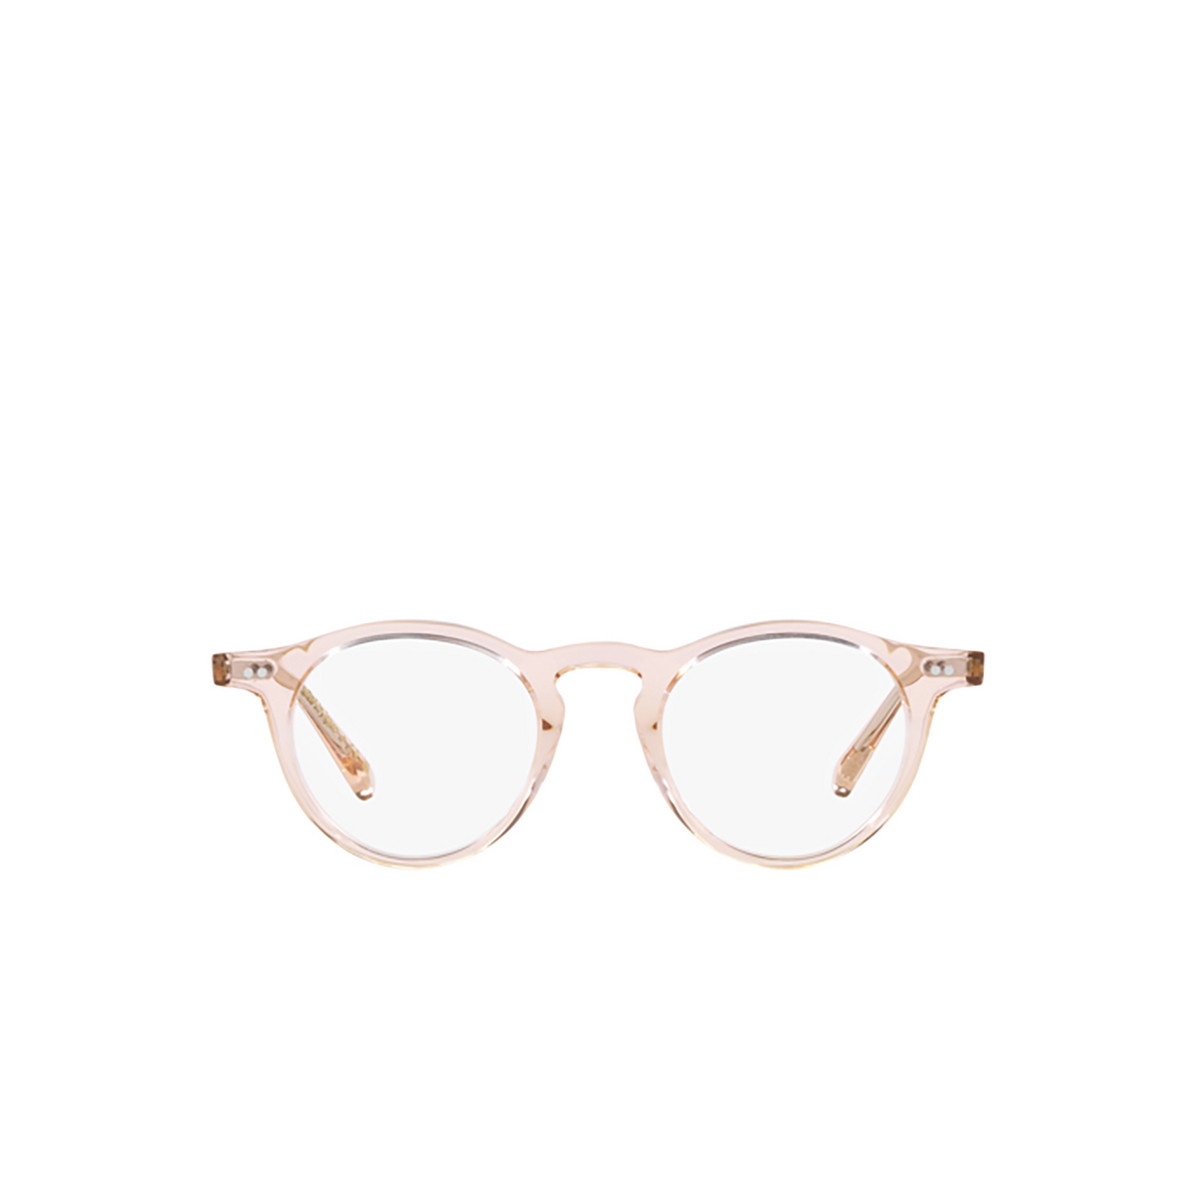 Oliver Peoples OP-13 Eyeglasses 1743 Cherry Blossom - front view